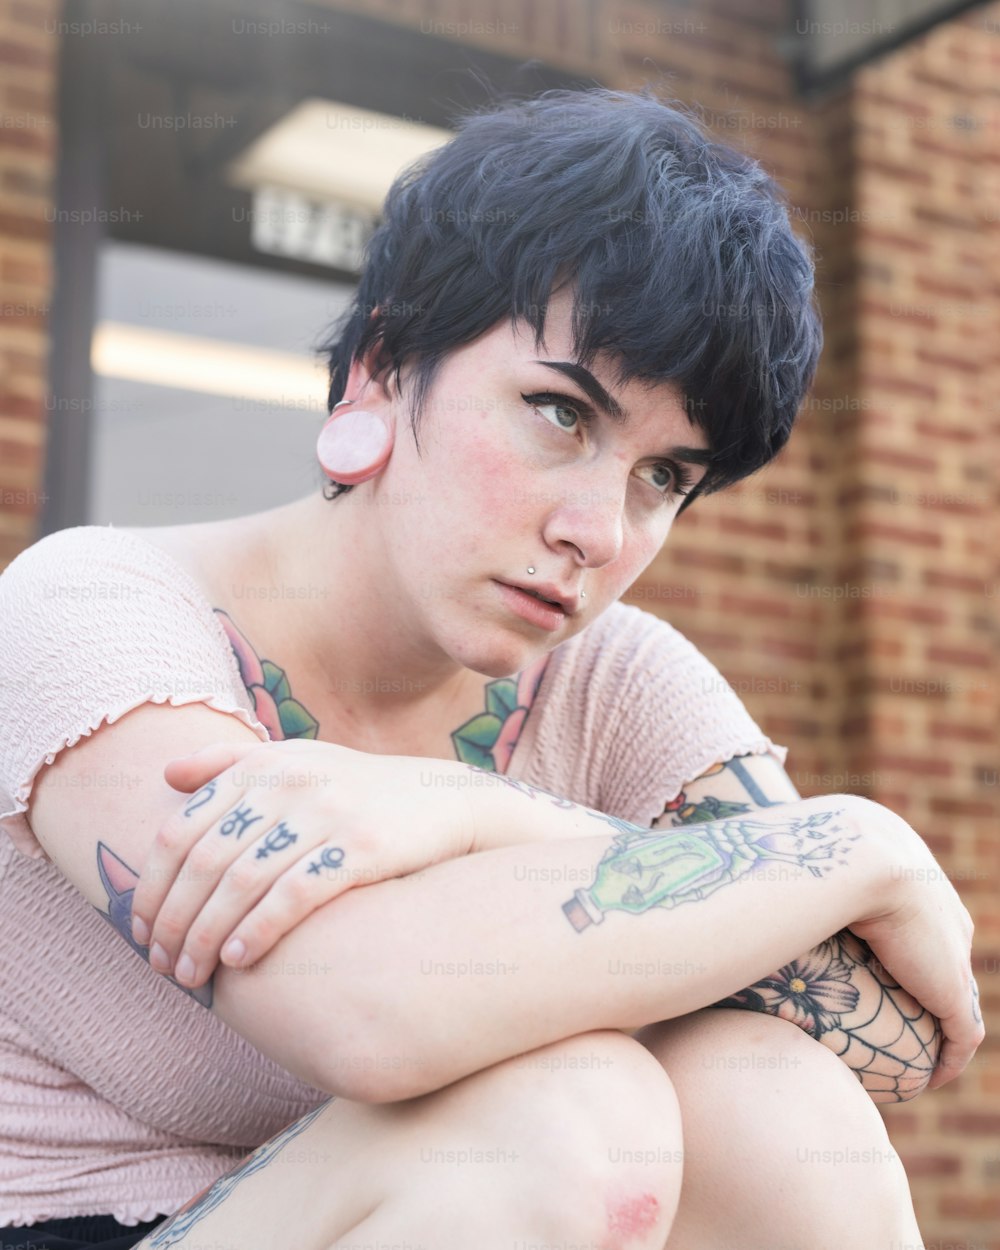 a woman with tattoos sitting on a bench